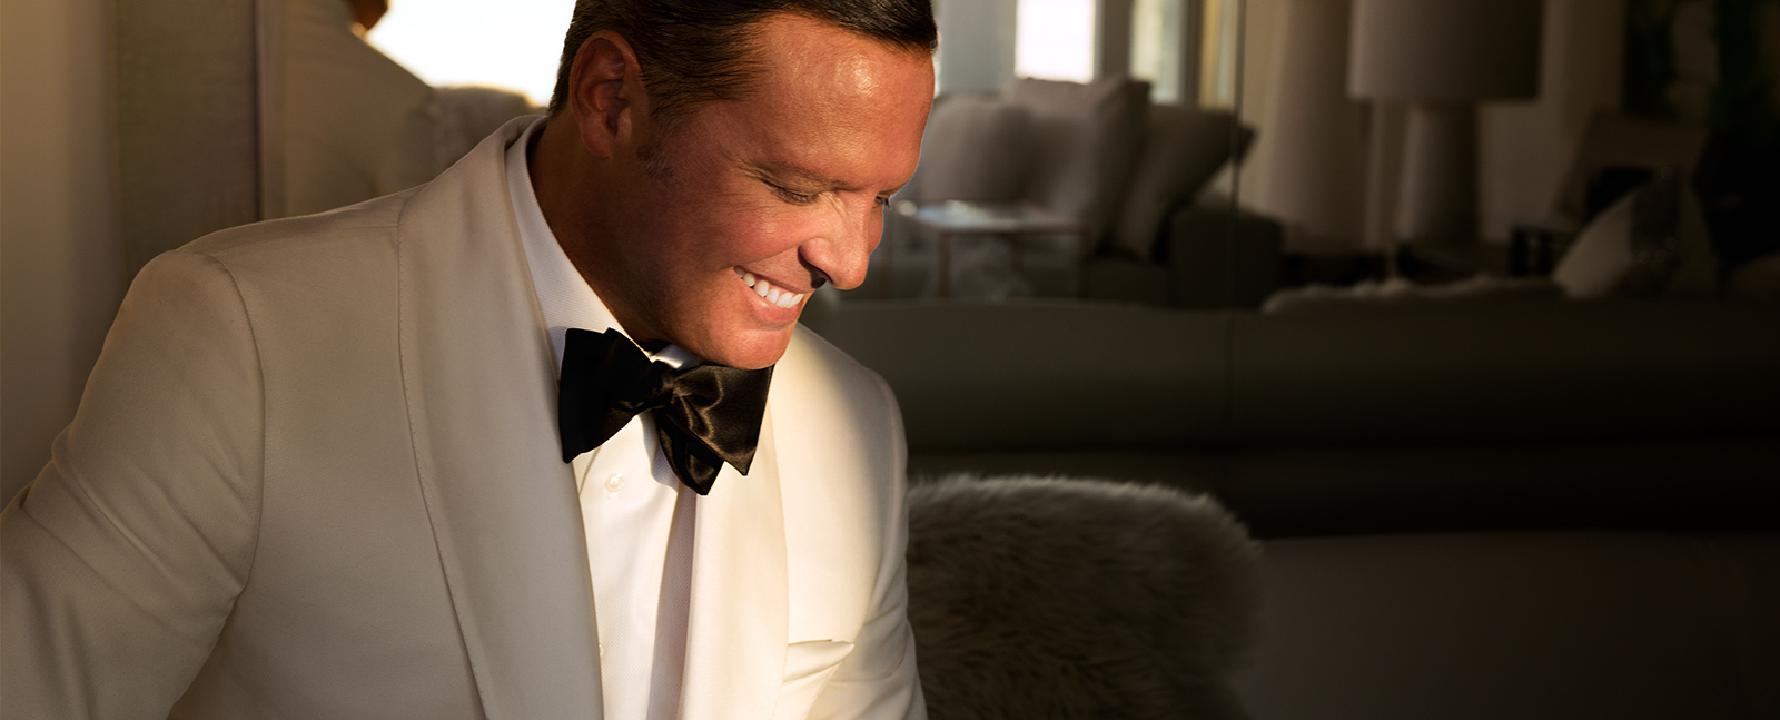 Promotional photograph of Luis Miguel.